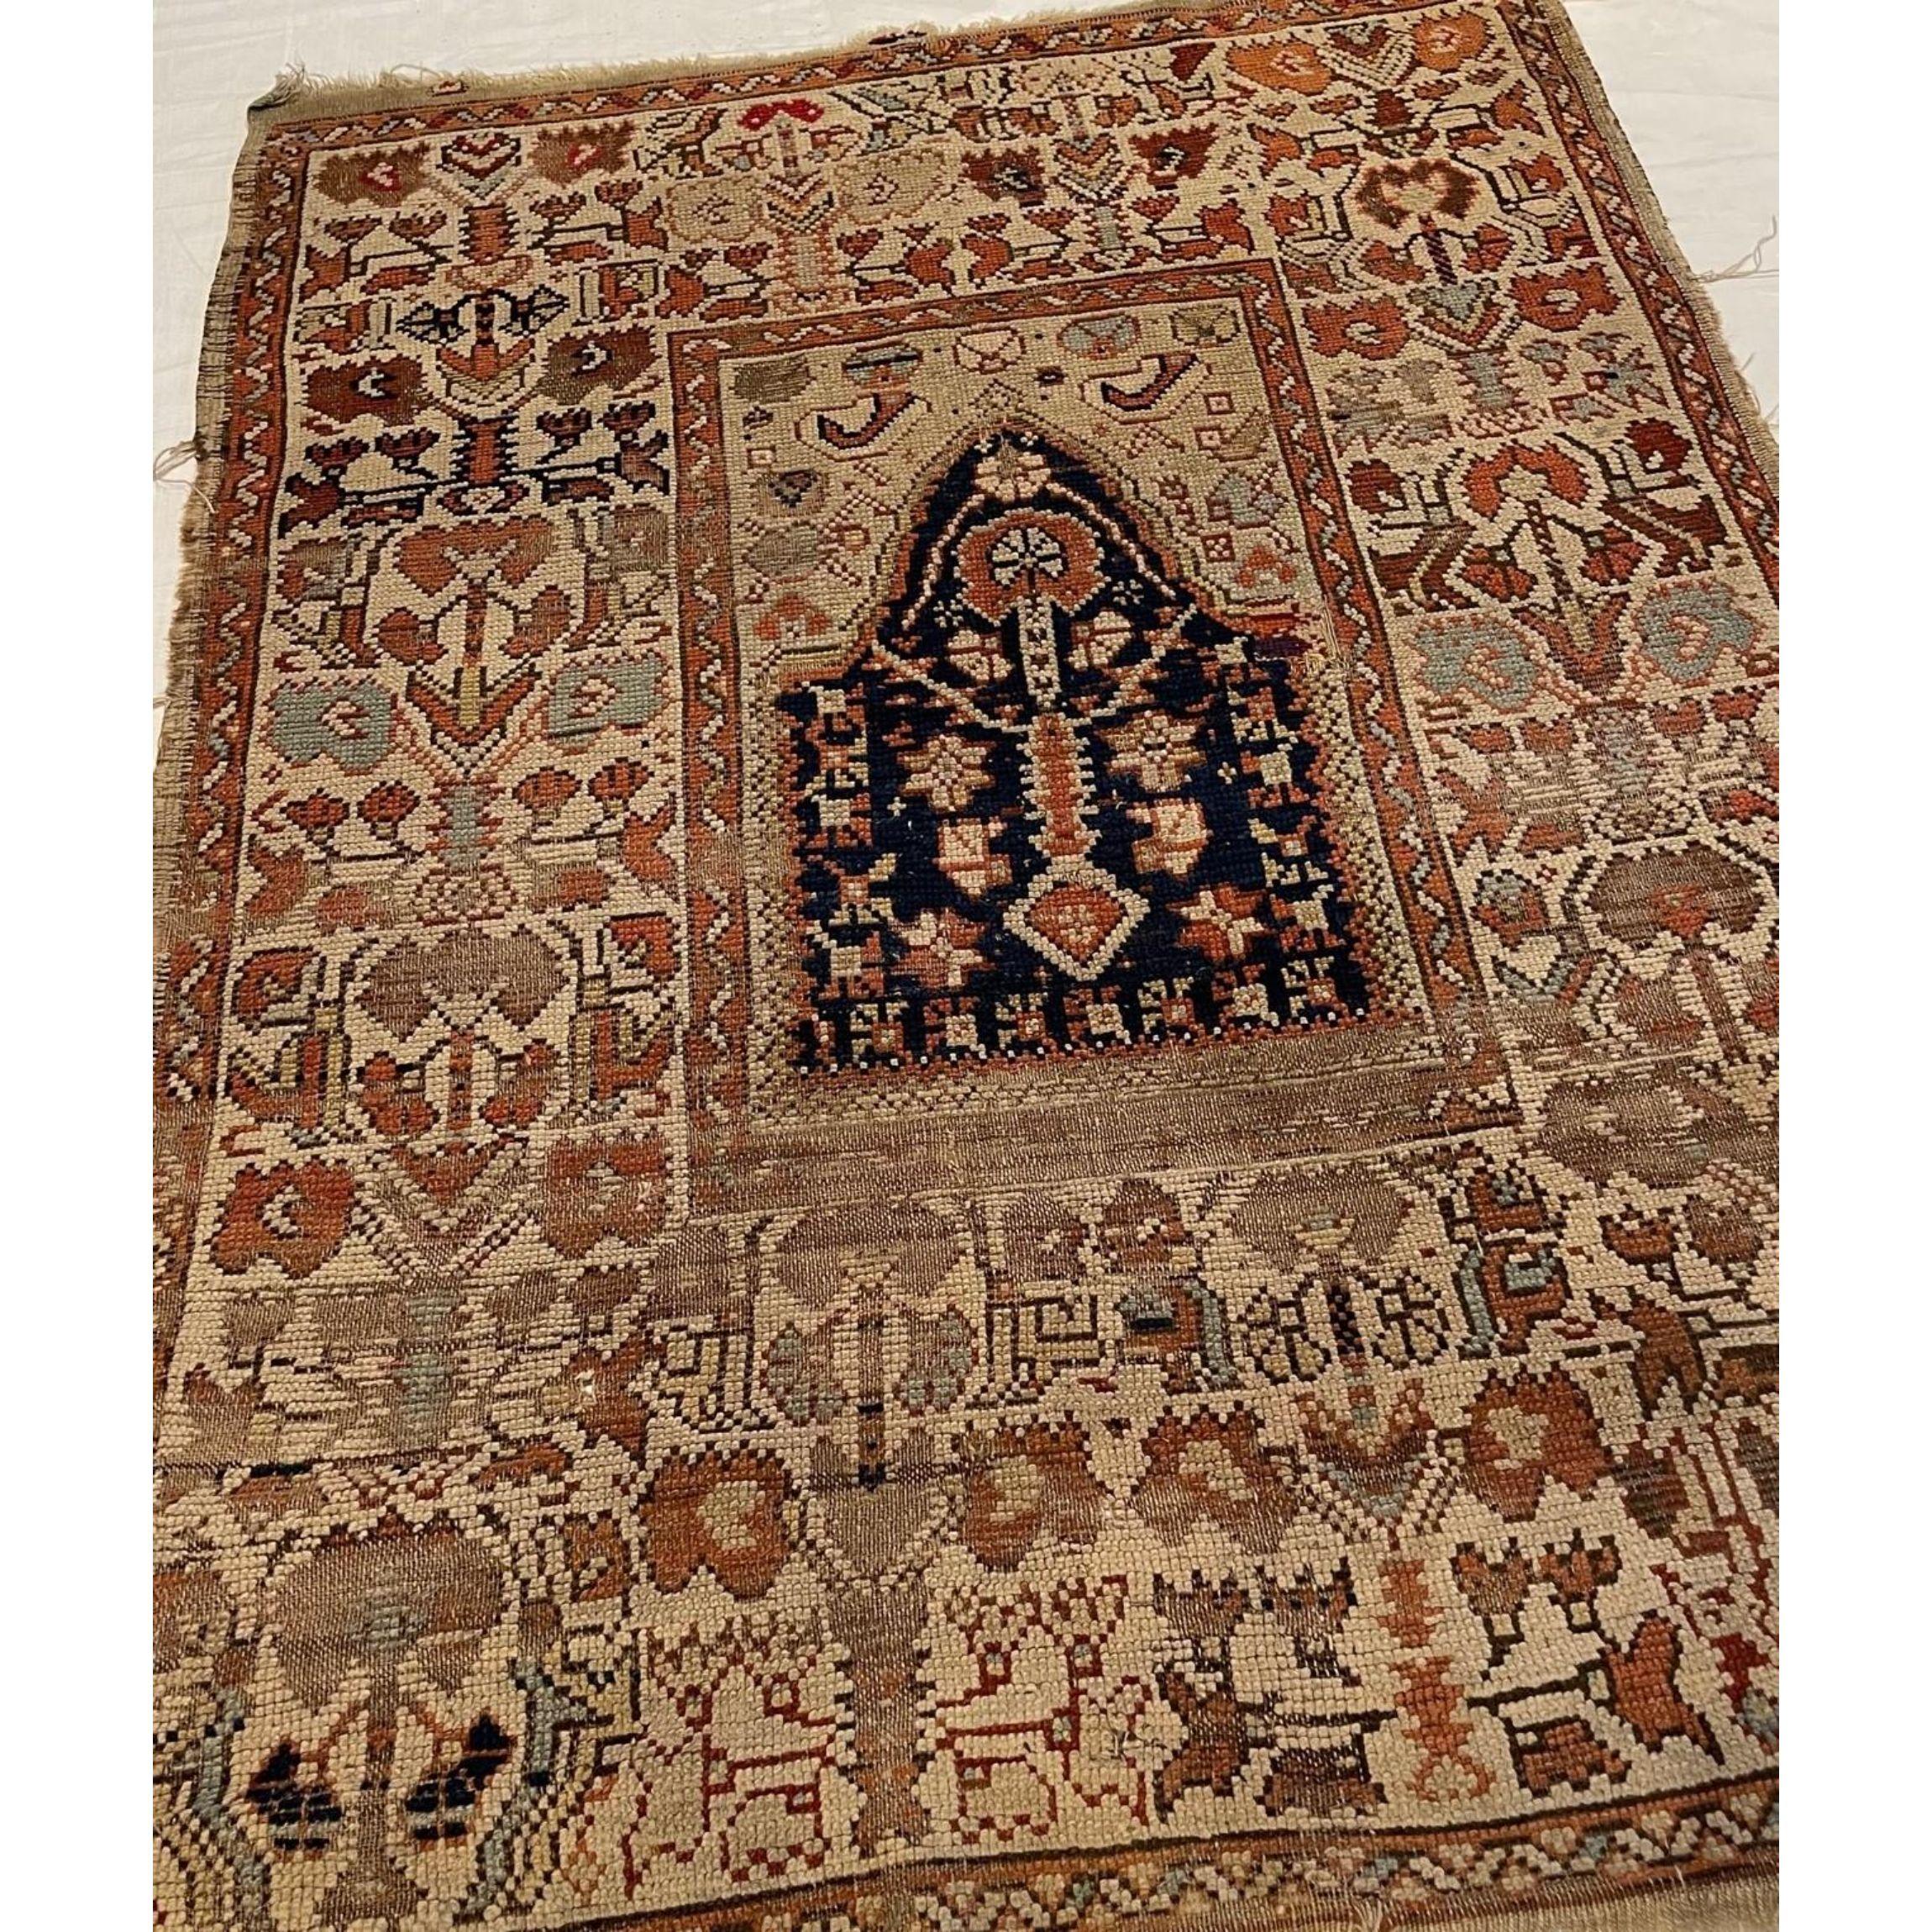 Antique TURKISH PRAYER Rug 4.6X3.3, handmade and hand-knotted, tribal and unique pieces,
woolen carpet, authentic Turkish carpe